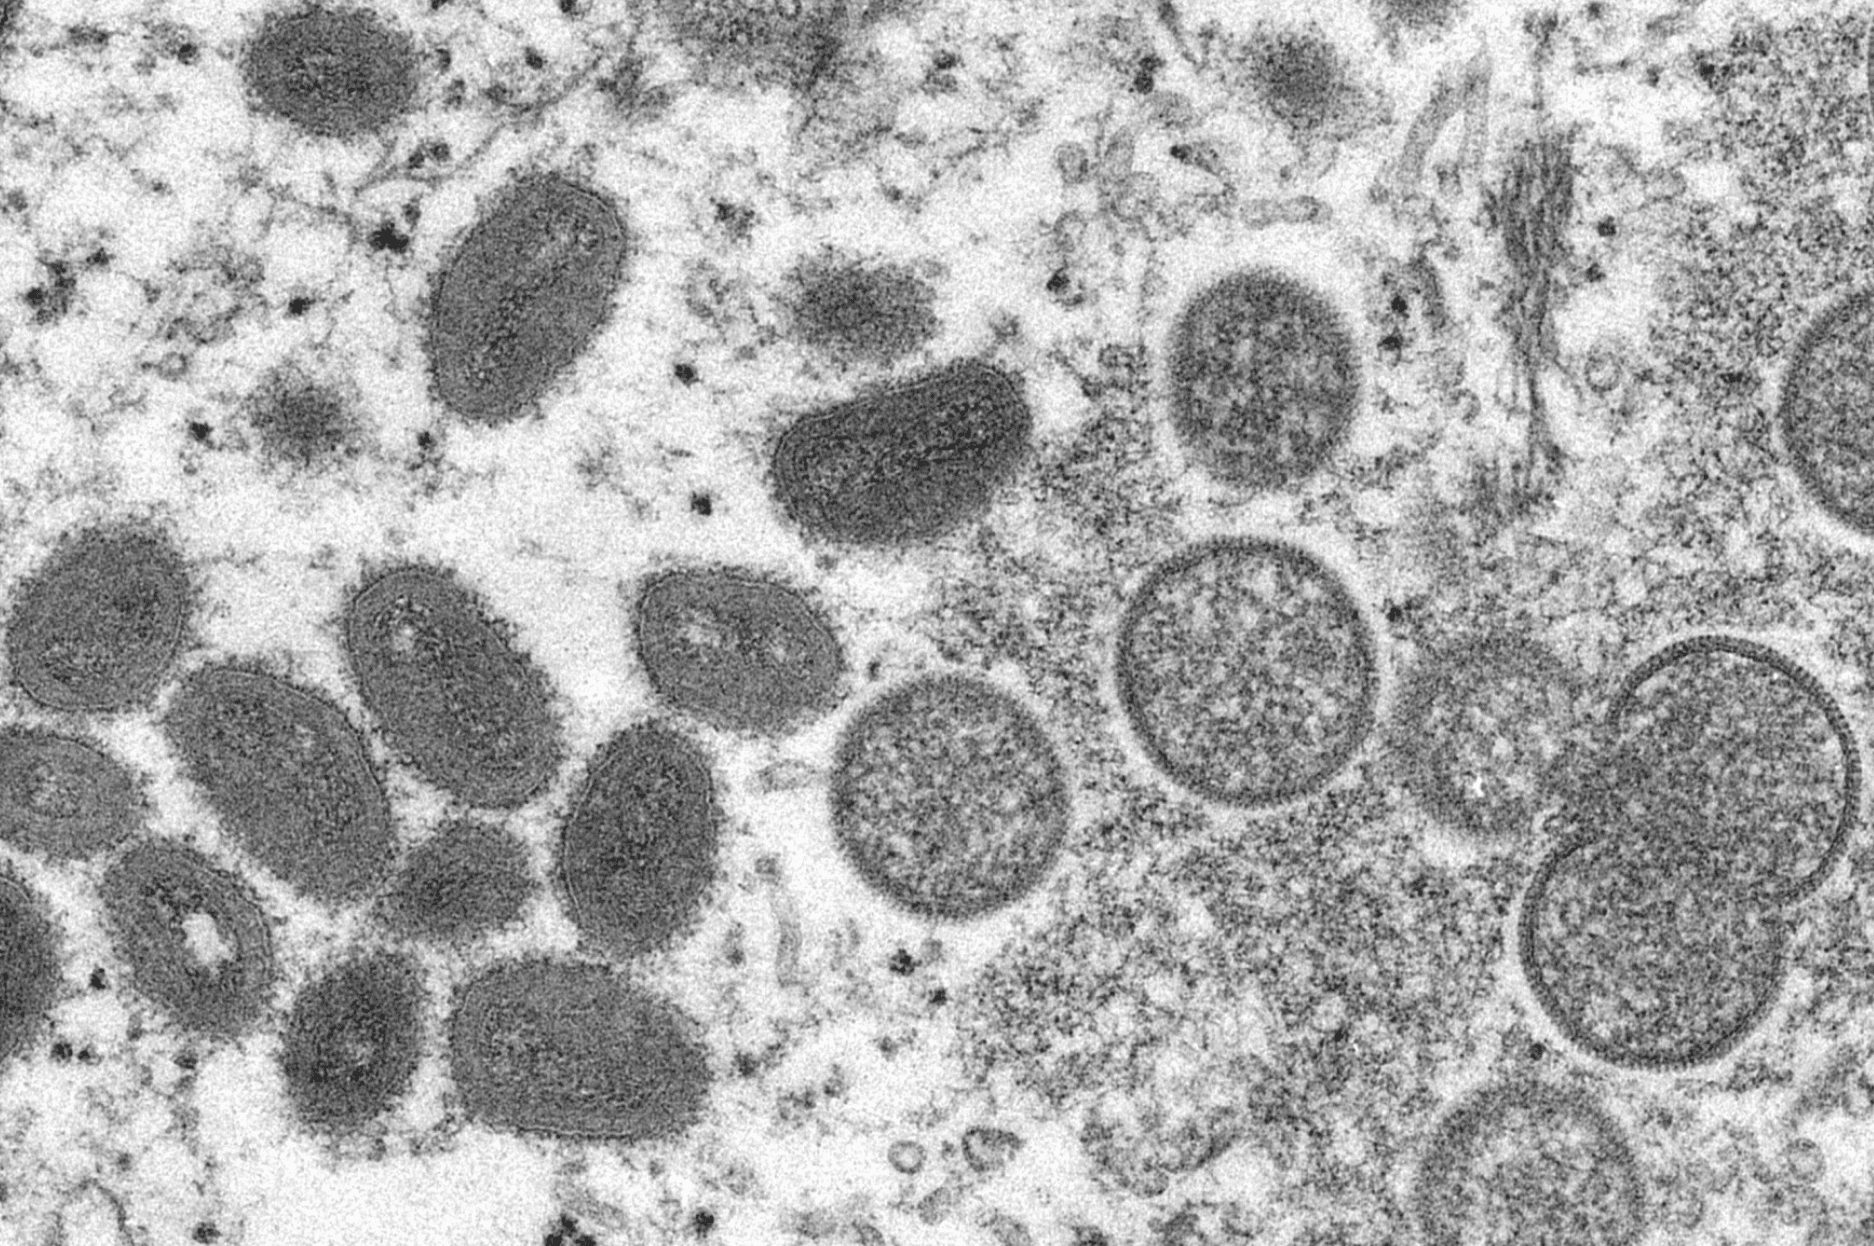 A electron microscope image made available by the Centers for Disease Control and Prevention shows mature, oval-shaped monkeypox virions